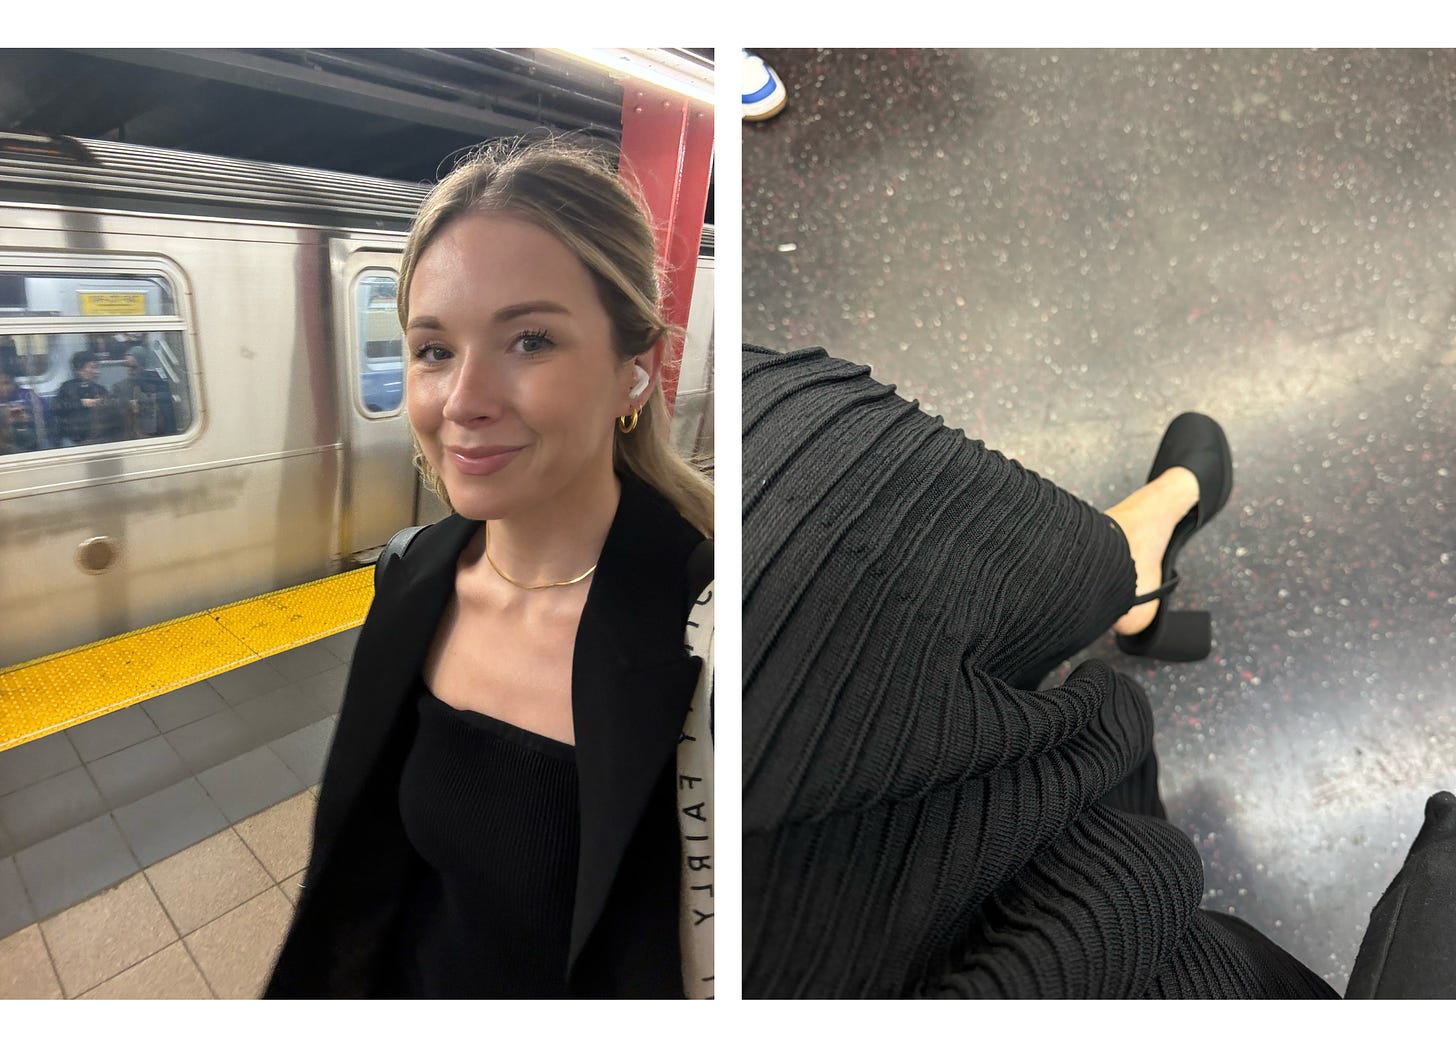 Photo of Katie at subway station and photo of Katie's shoes on subway